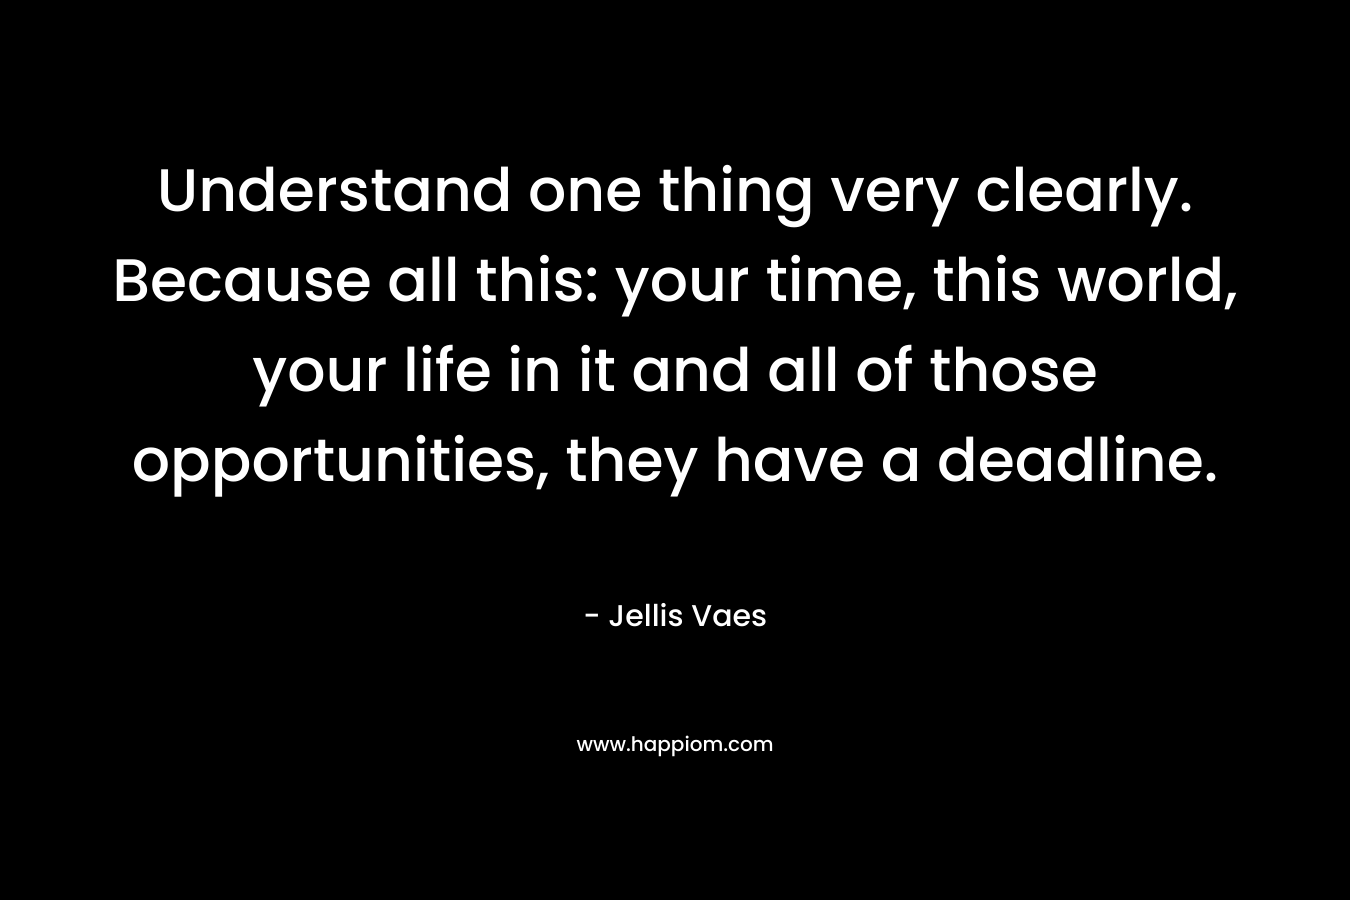 Understand one thing very clearly. Because all this: your time, this world, your life in it and all of those opportunities, they have a deadline.